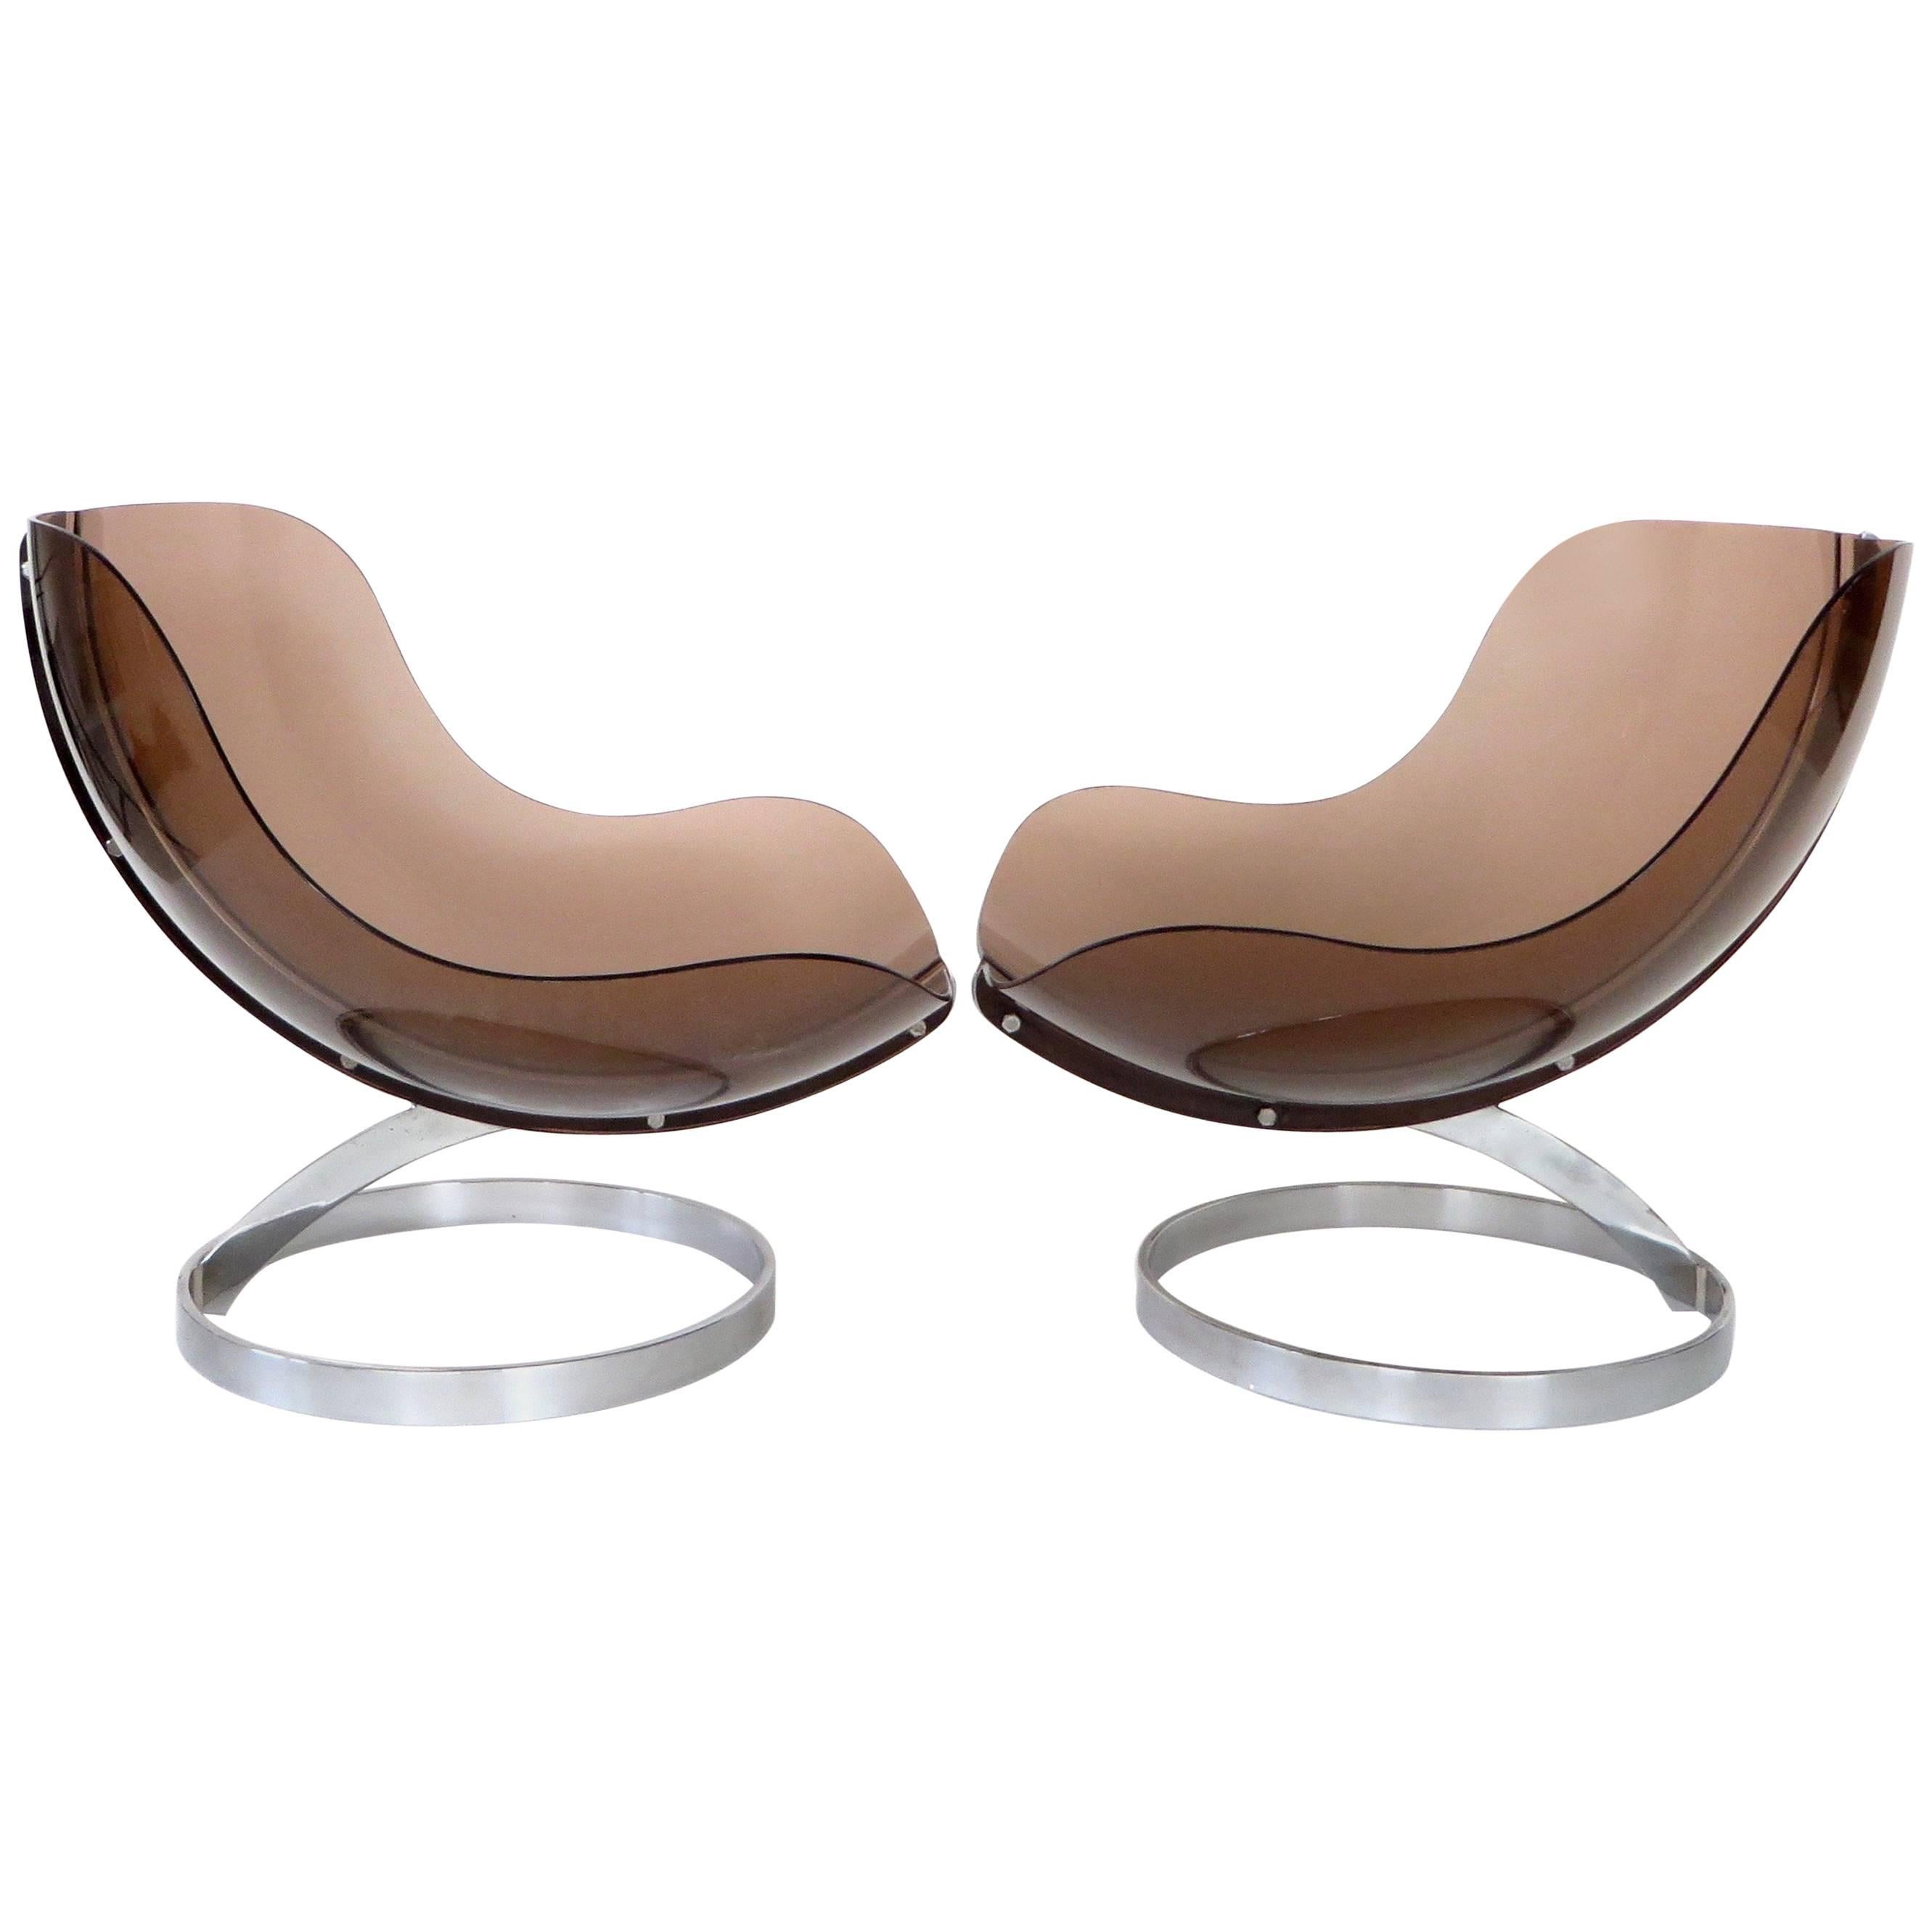 Boris Tabacoff by Editions MMM Pair of French "Sphere" Lounge Chairs c 1971